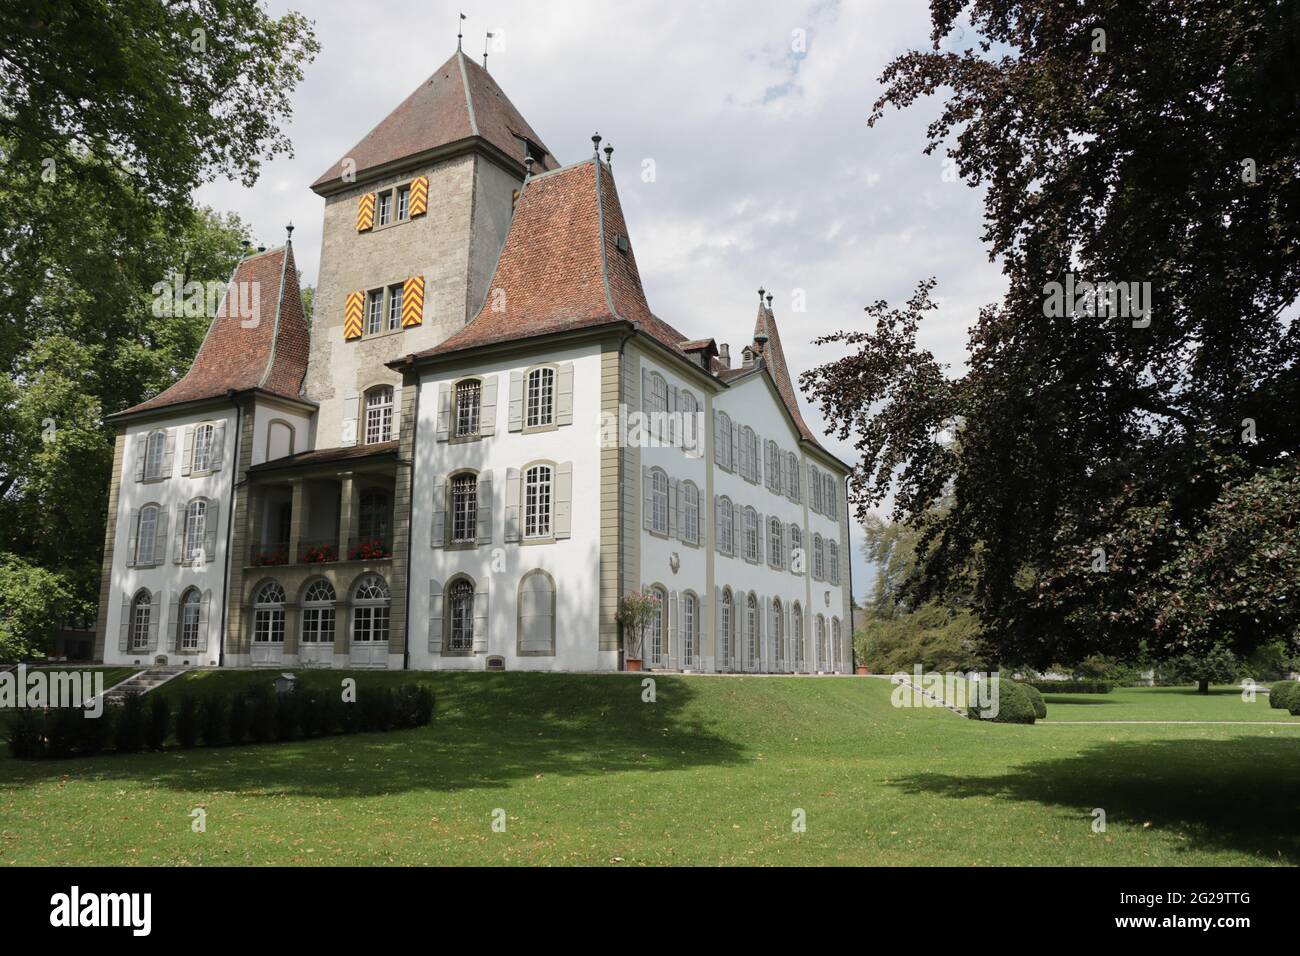 Medieval castle with extensions from early modern age. Jegenstorf, Canton of Berne, Switzerland. Stock Photo